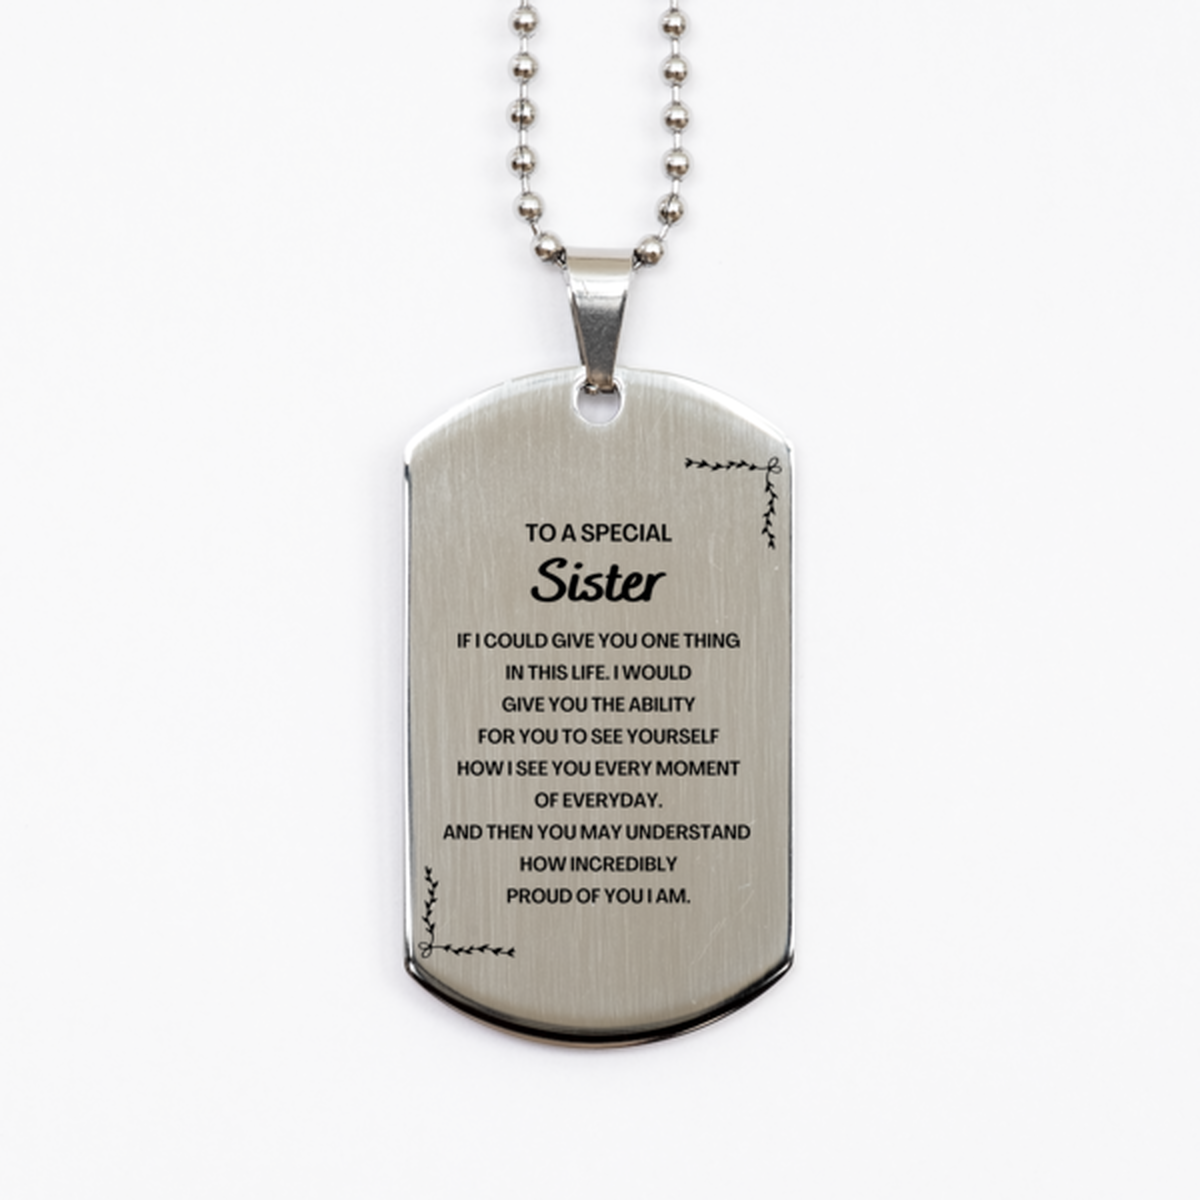 To My Sister Silver Dog Tag, Gifts For Sister Engraved, Inspirational Gifts for Christmas Birthday, Epic Gifts for Sister To A Special Sister how incredibly proud of you I am